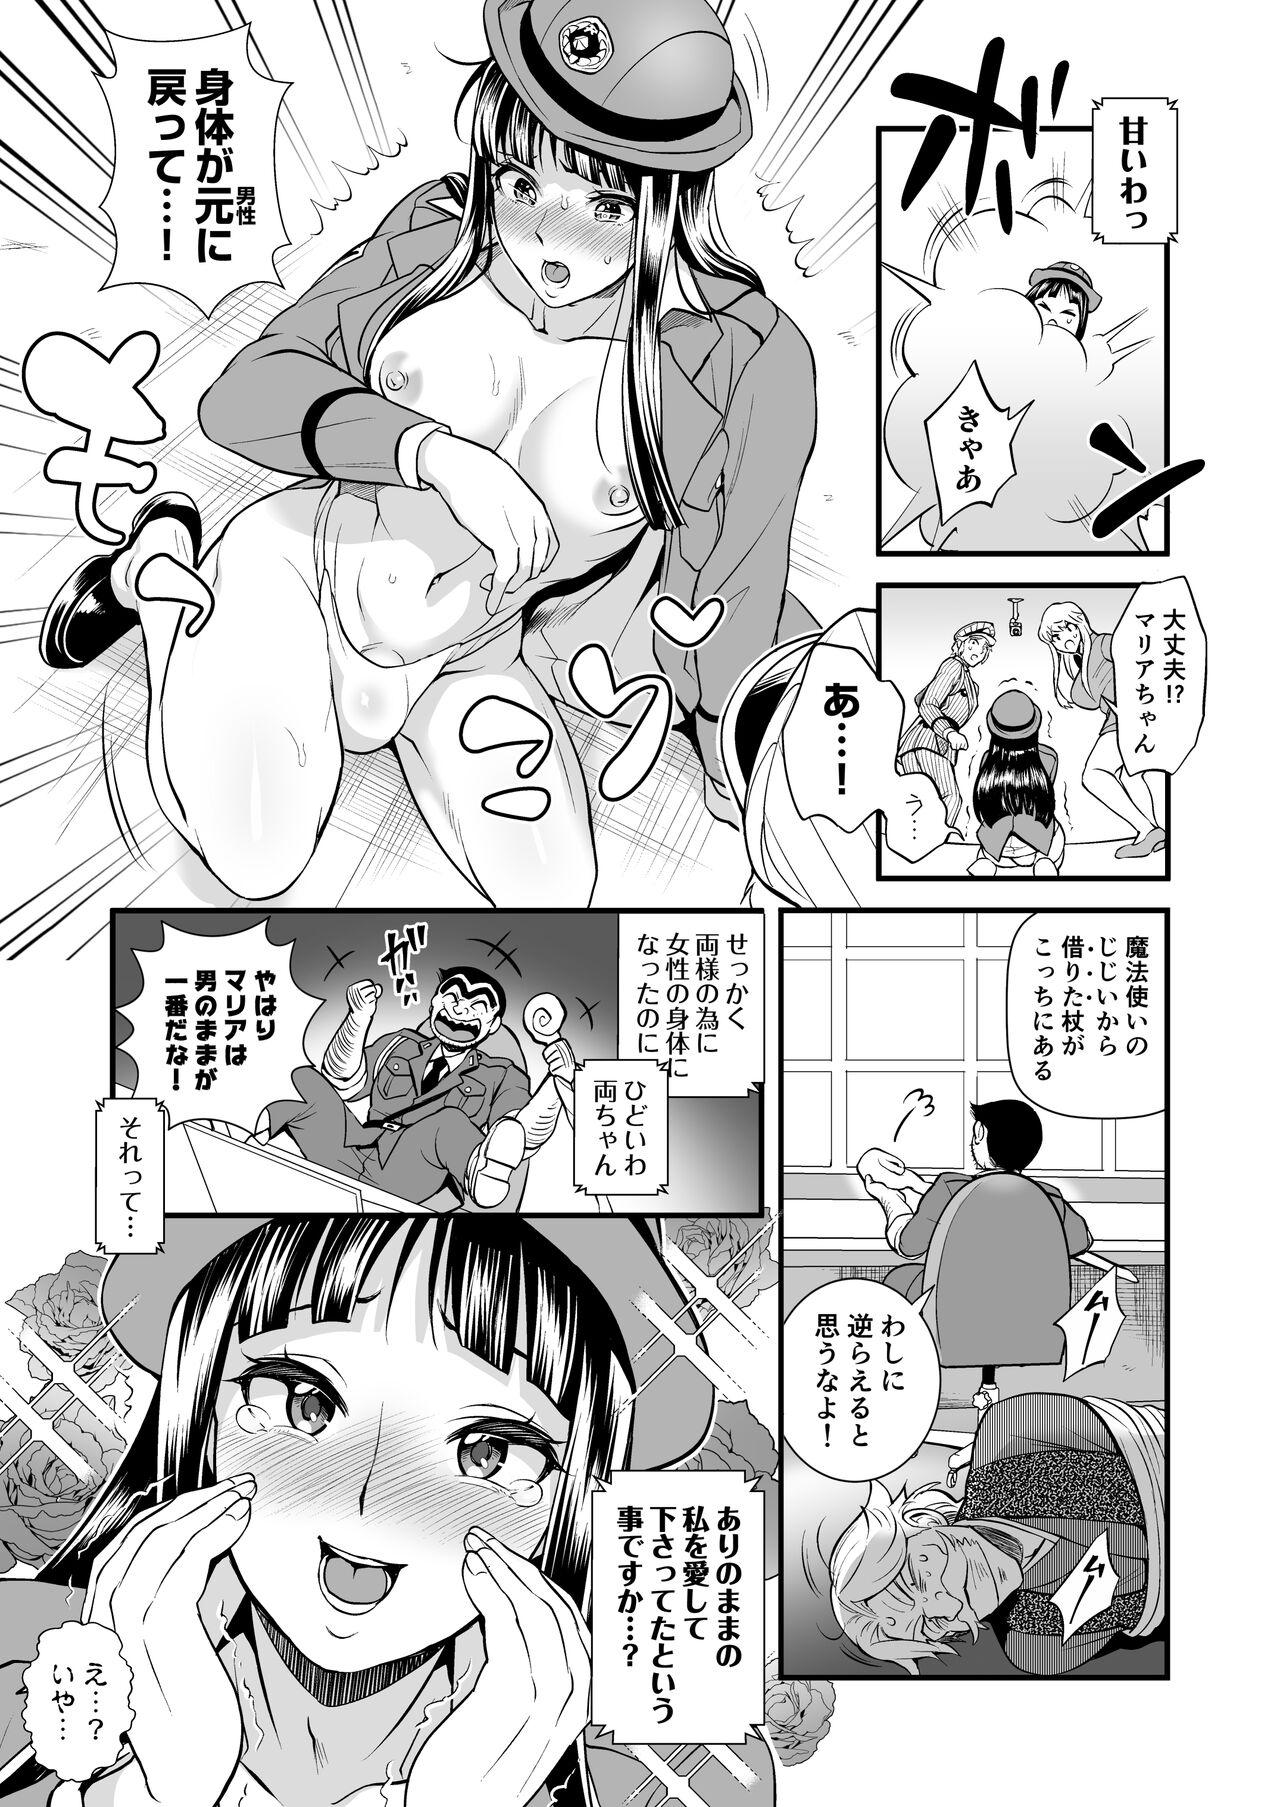 Piercings Volume of the room where Reiko & Maria & Nakagawa can't leave unless they do something crazy - Kochikame Blows - Page 9